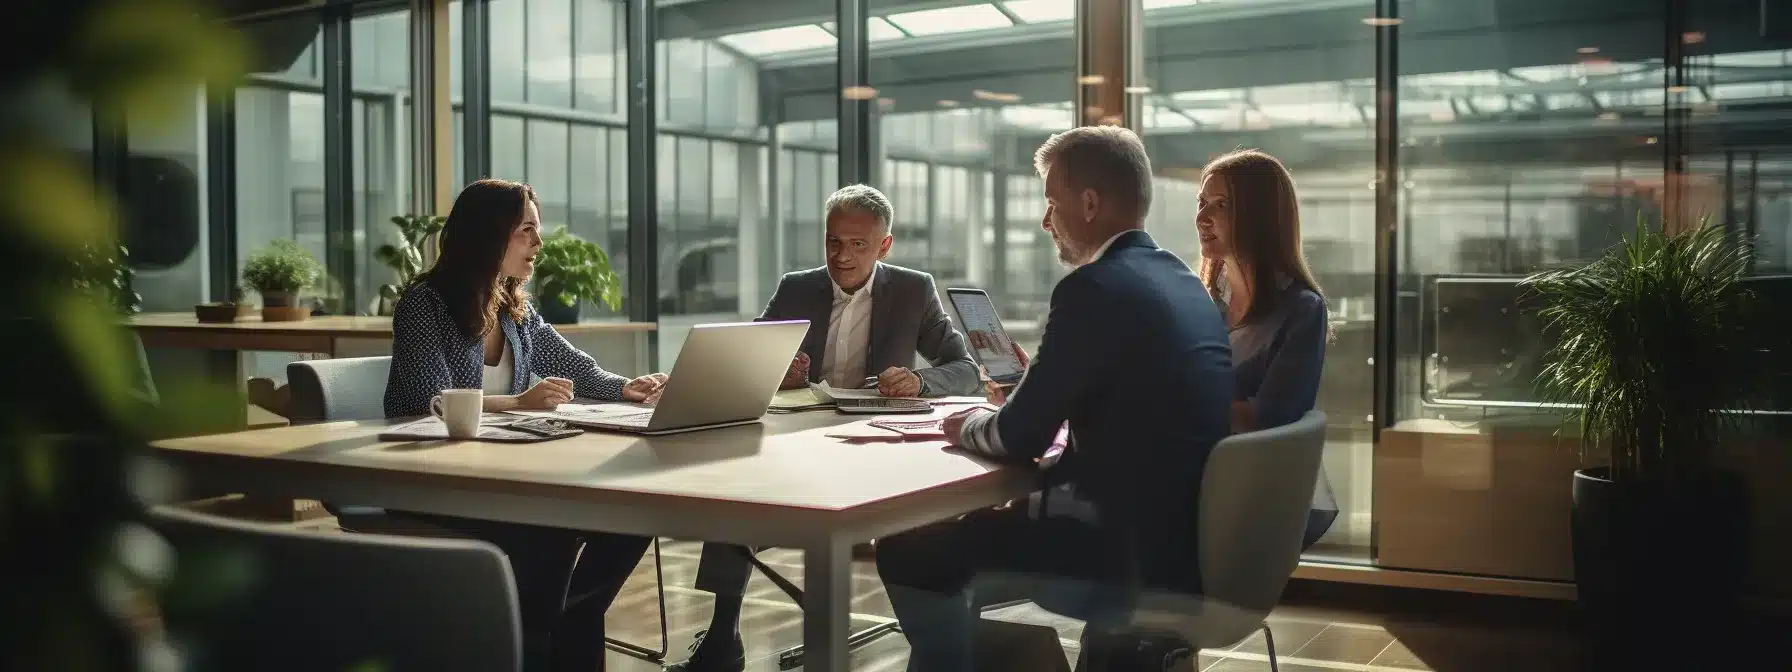 A Group Of Business Executives Discuss Brand Management Strategies In A Modern Office Setting.